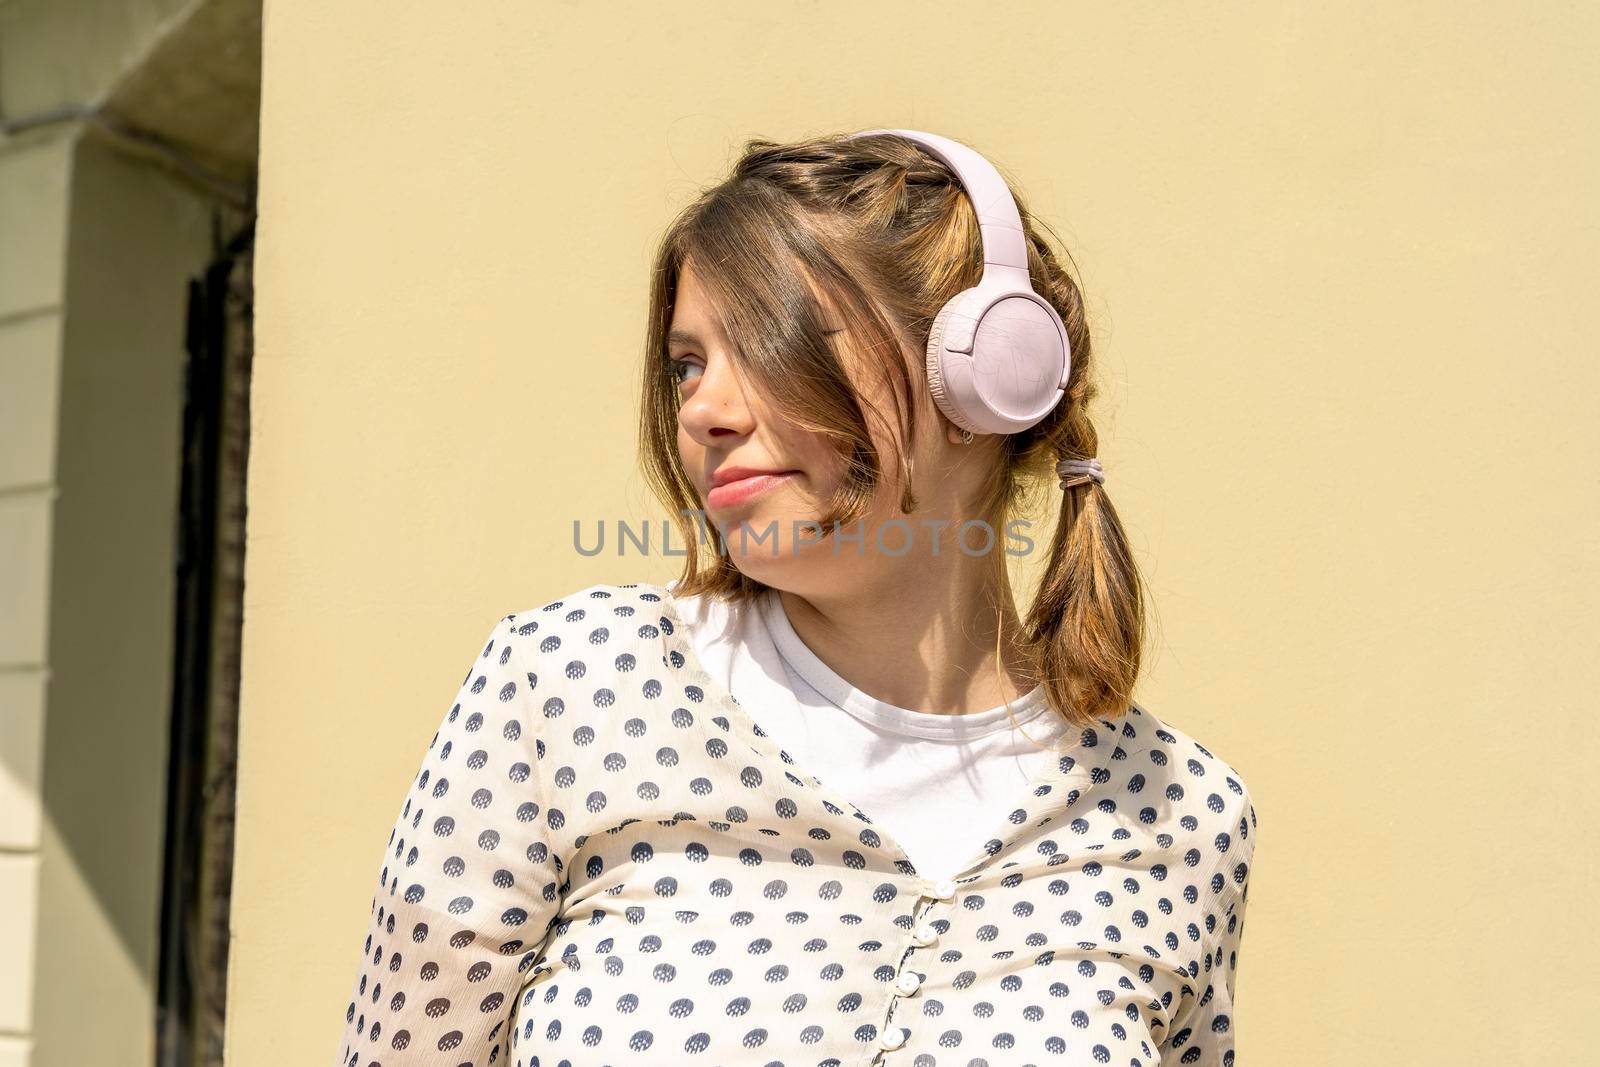 Teenage cute Caucasian girl has a good time listening to music with headphones. a beautiful fashionable girl enjoys music. a girl is dancing, listening to music with headphones, against a yellow background